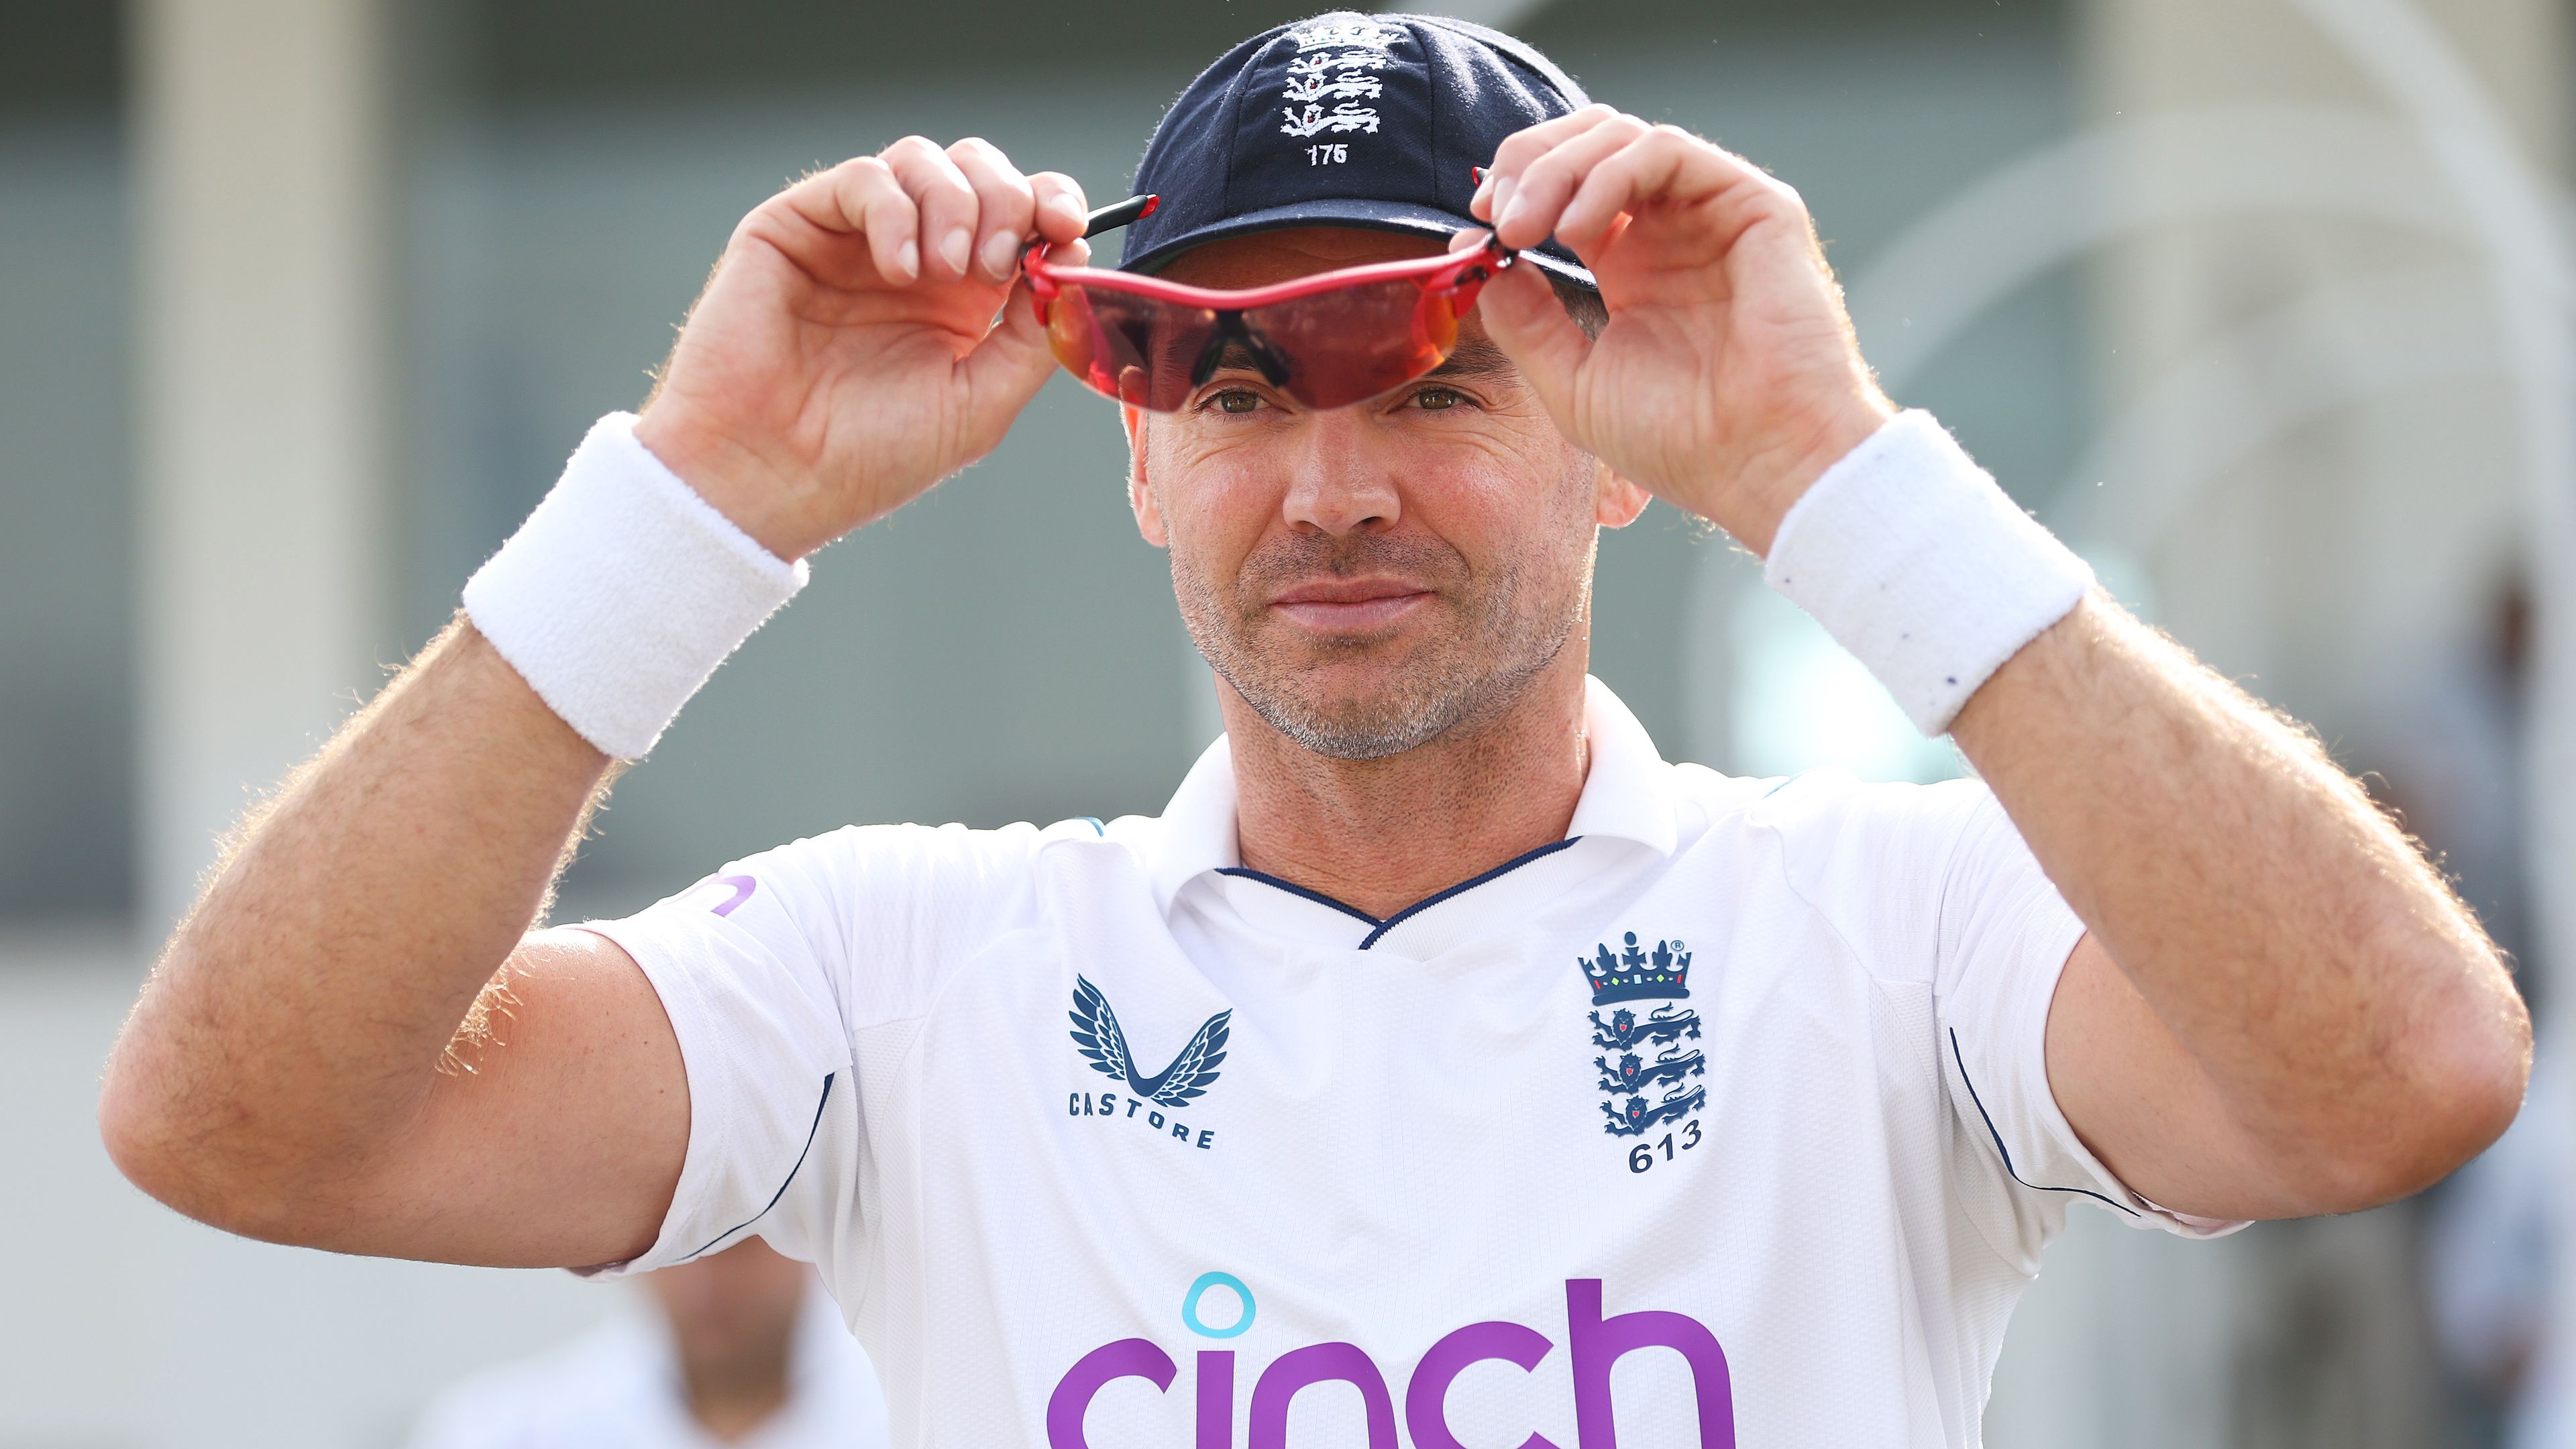 RAWALPINDI, PAKISTAN - DECEMBER 02: James Anderson of England prepares to go and field during the First Test Match between Pakistan and England at Rawalpindi Cricket Stadium on December 02, 2022 in Rawalpindi, Pakistan. (Photo by Matthew Lewis/Getty Images)